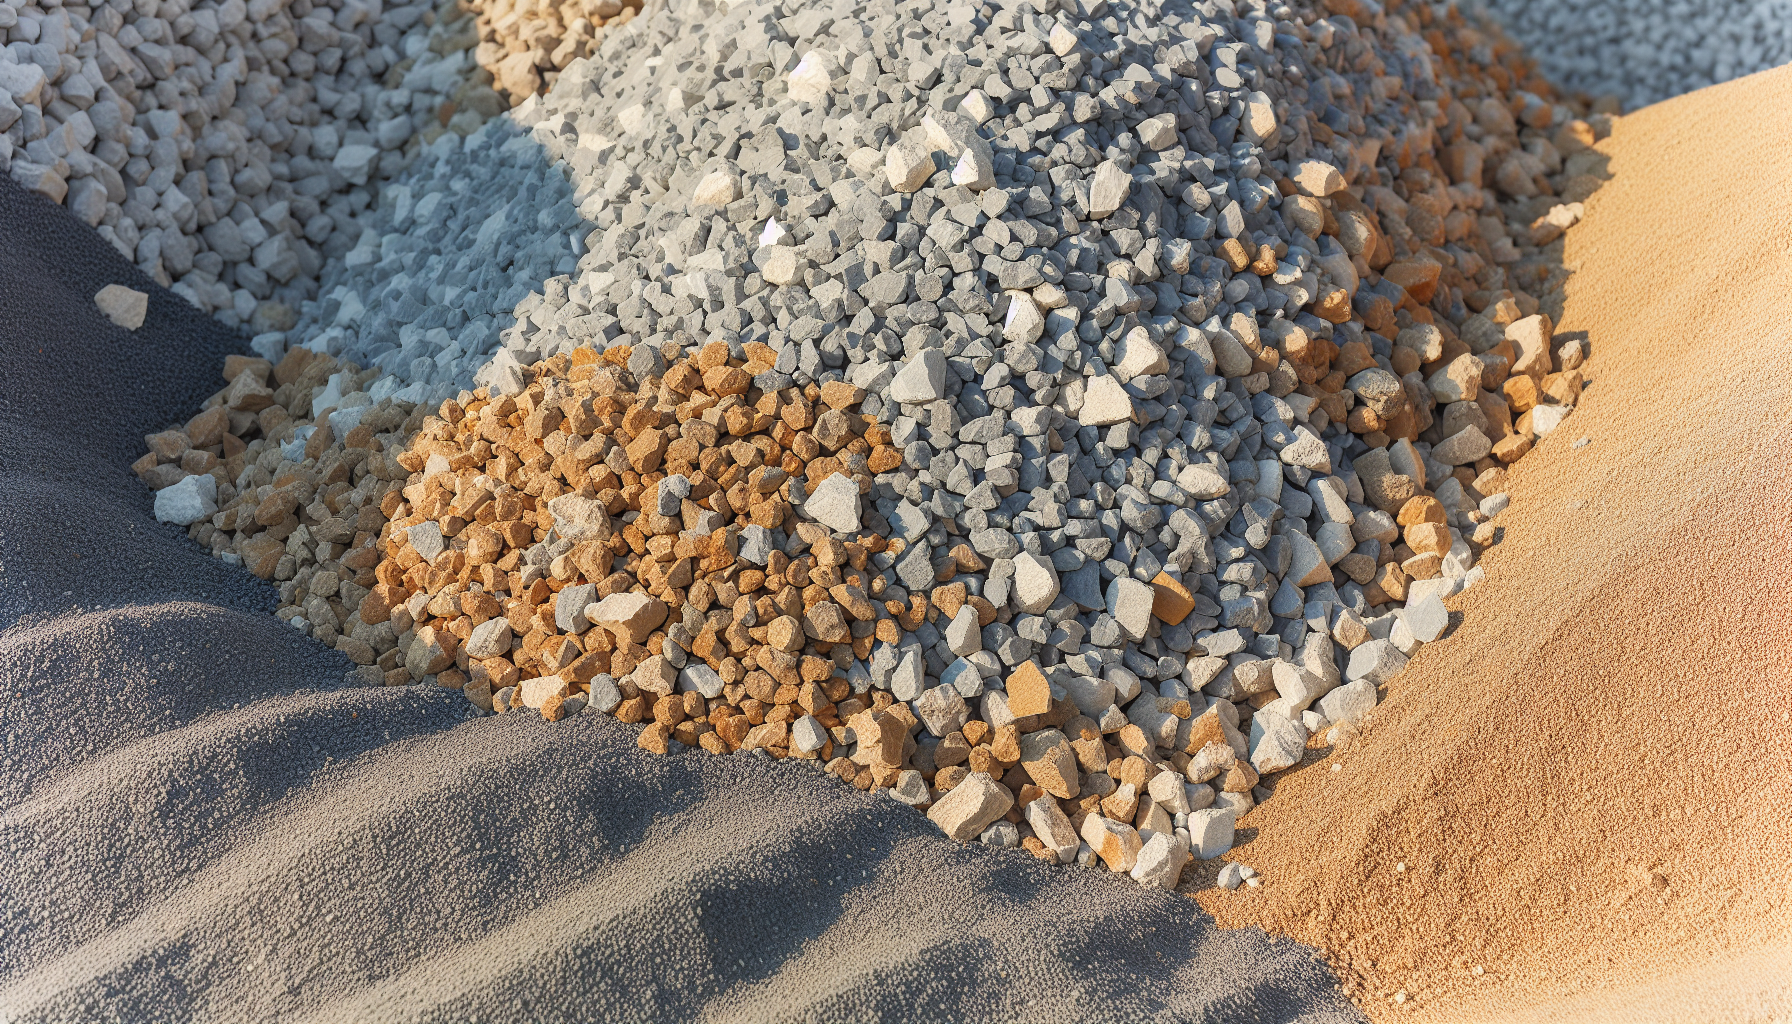 A pile of construction aggregates including gravel and crushed rock